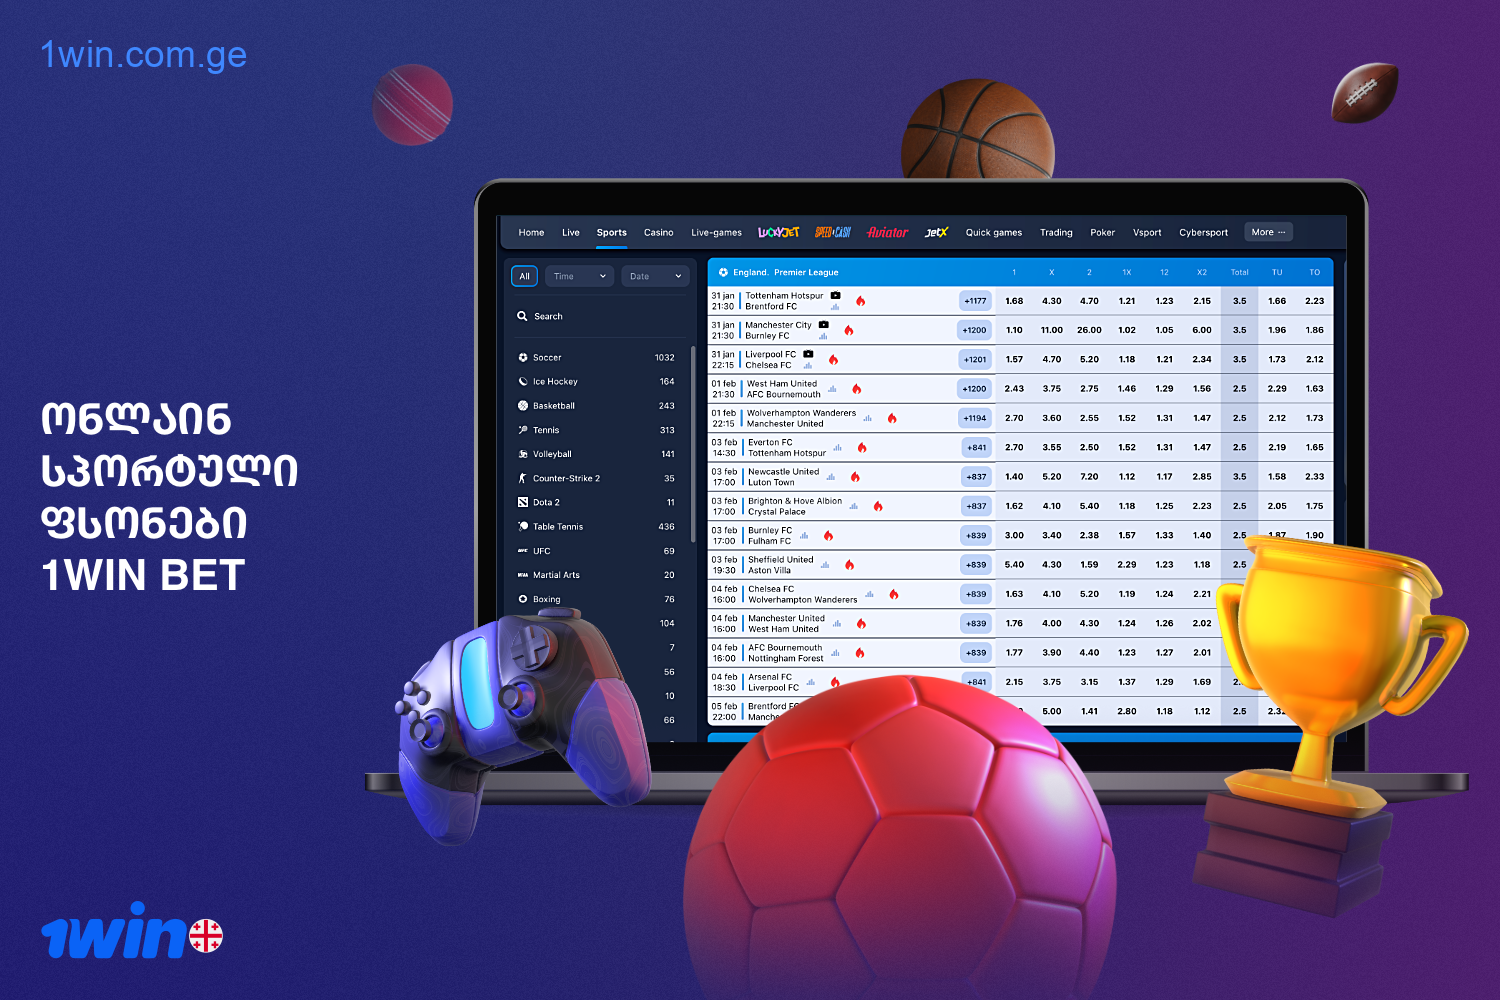 On the 1win platform, users from Georgia have access to online betting on dozens of sports